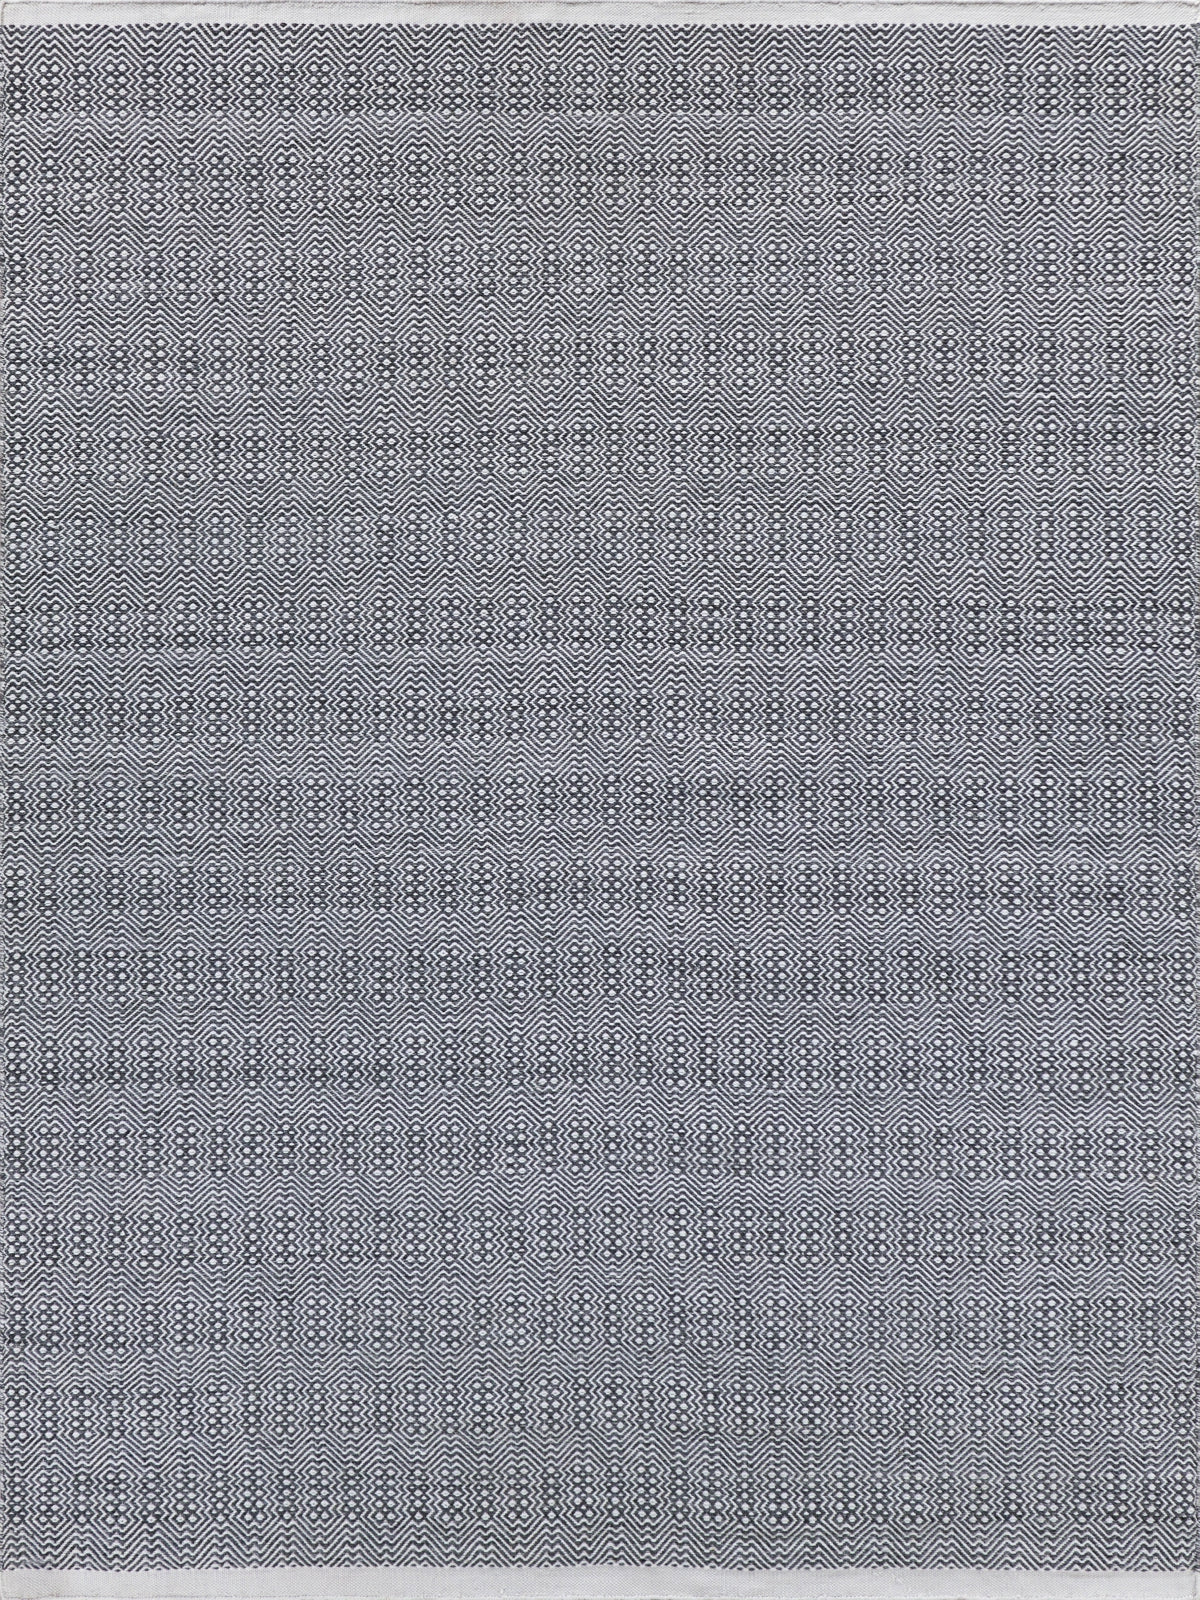 Exquisite Rugs Echo 4892 Ivory/Gray Area Rug